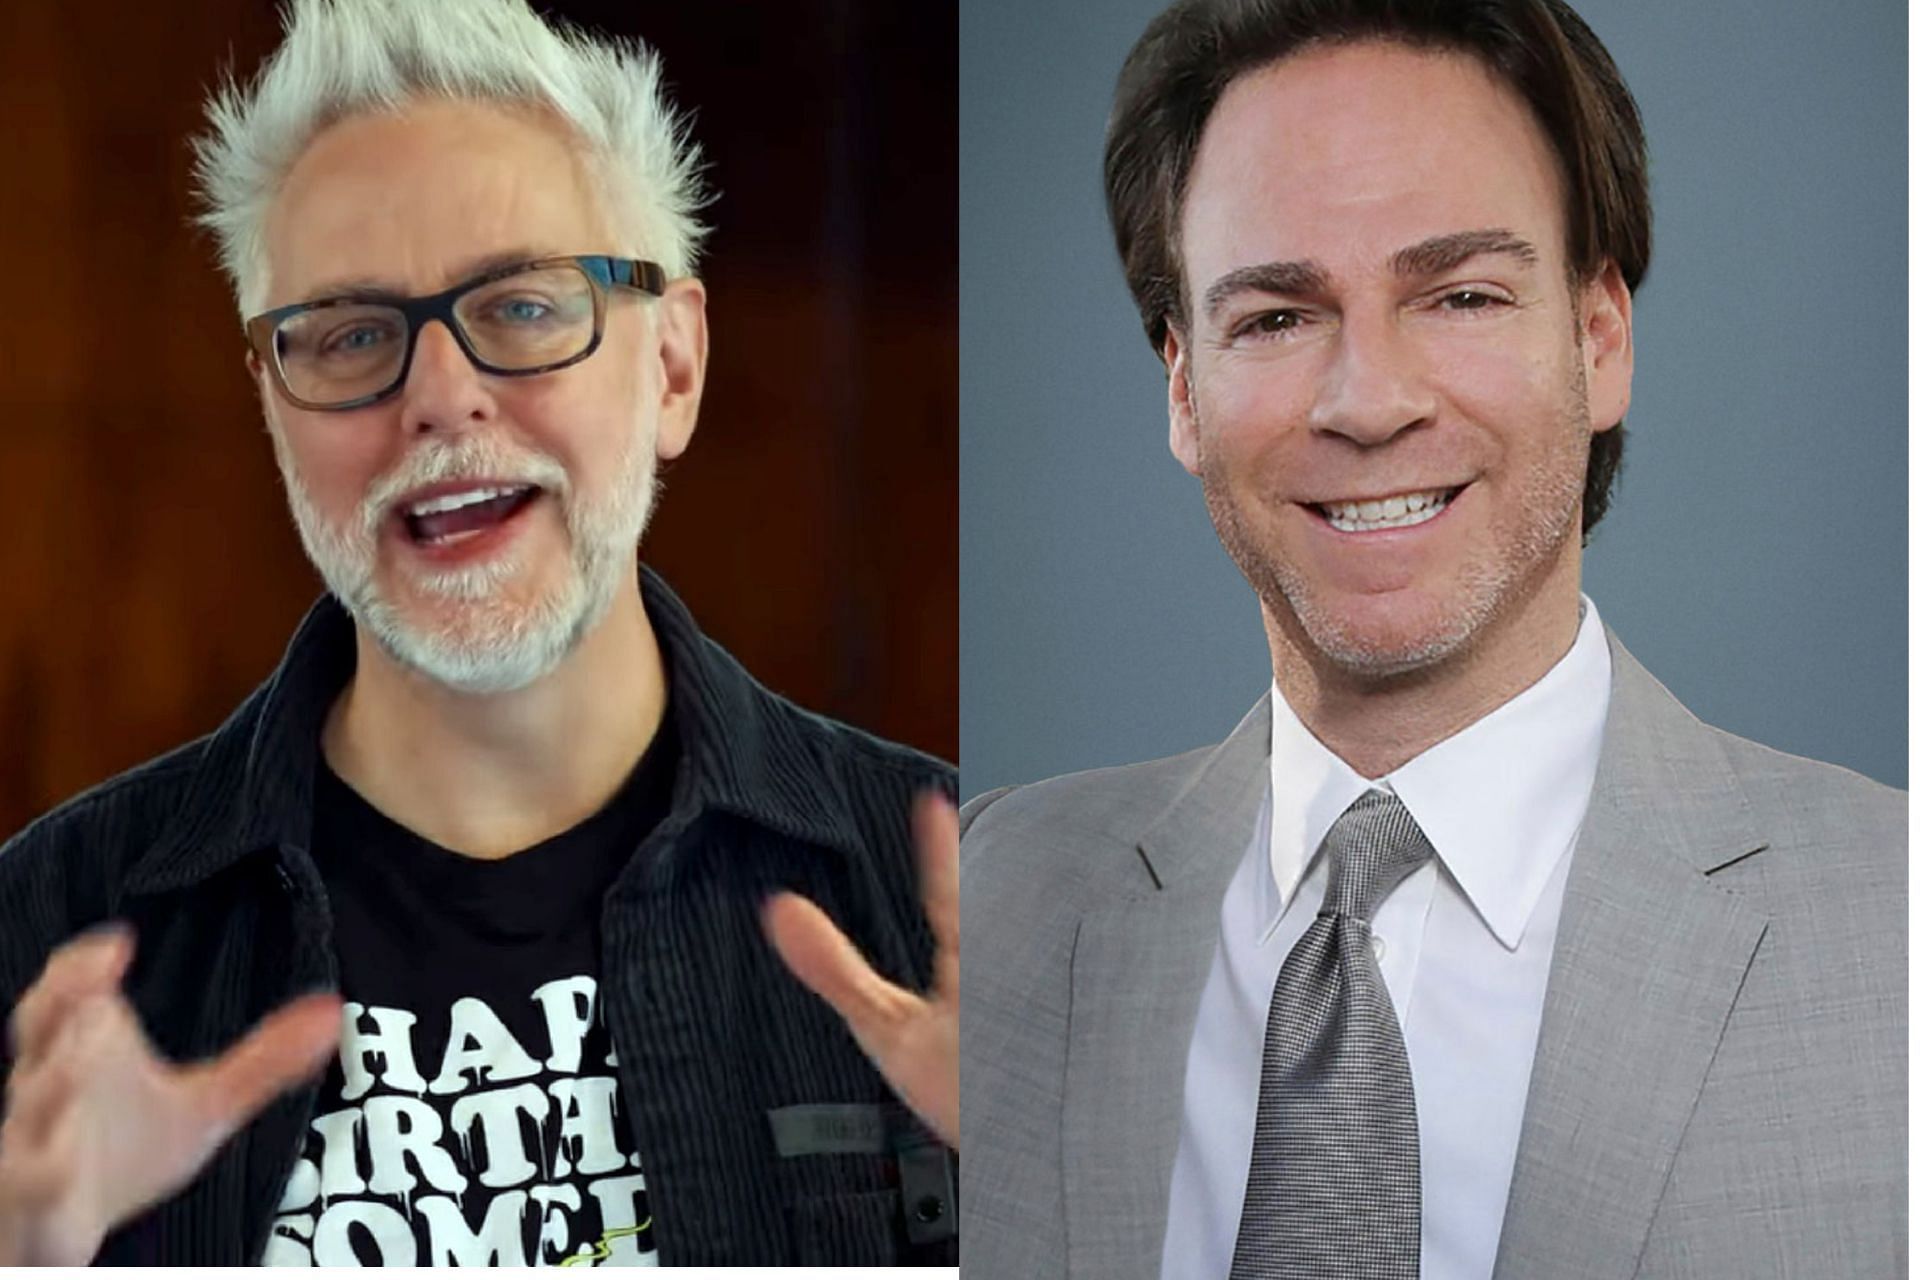 James Gunn and Peter Safran, Co-Chairmen and Co-CEOs of DC Studios (Images via Getty Images)